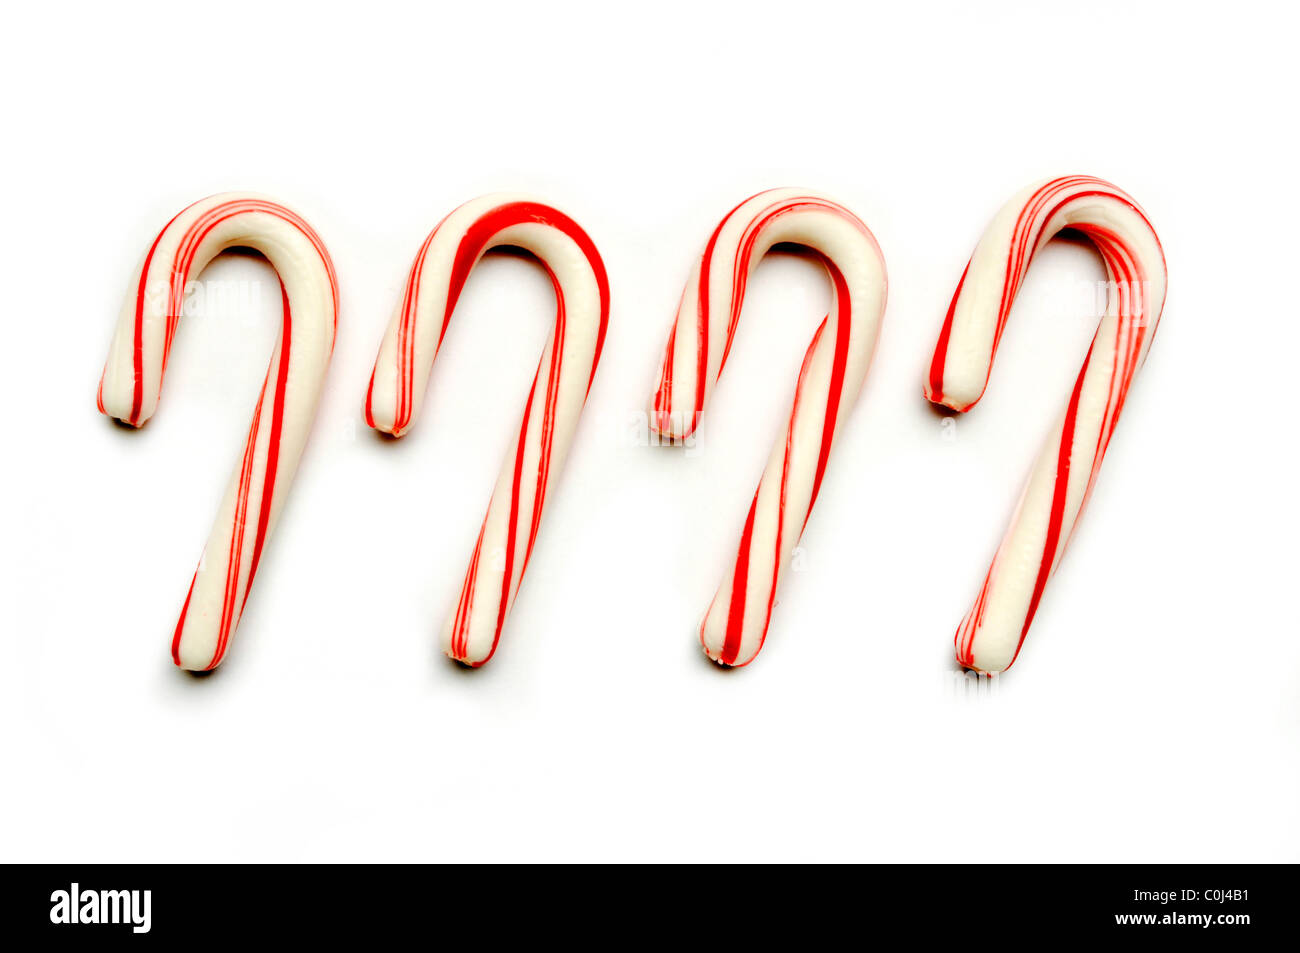 Candy canes Cut Out Stock Images & Pictures - Alamy